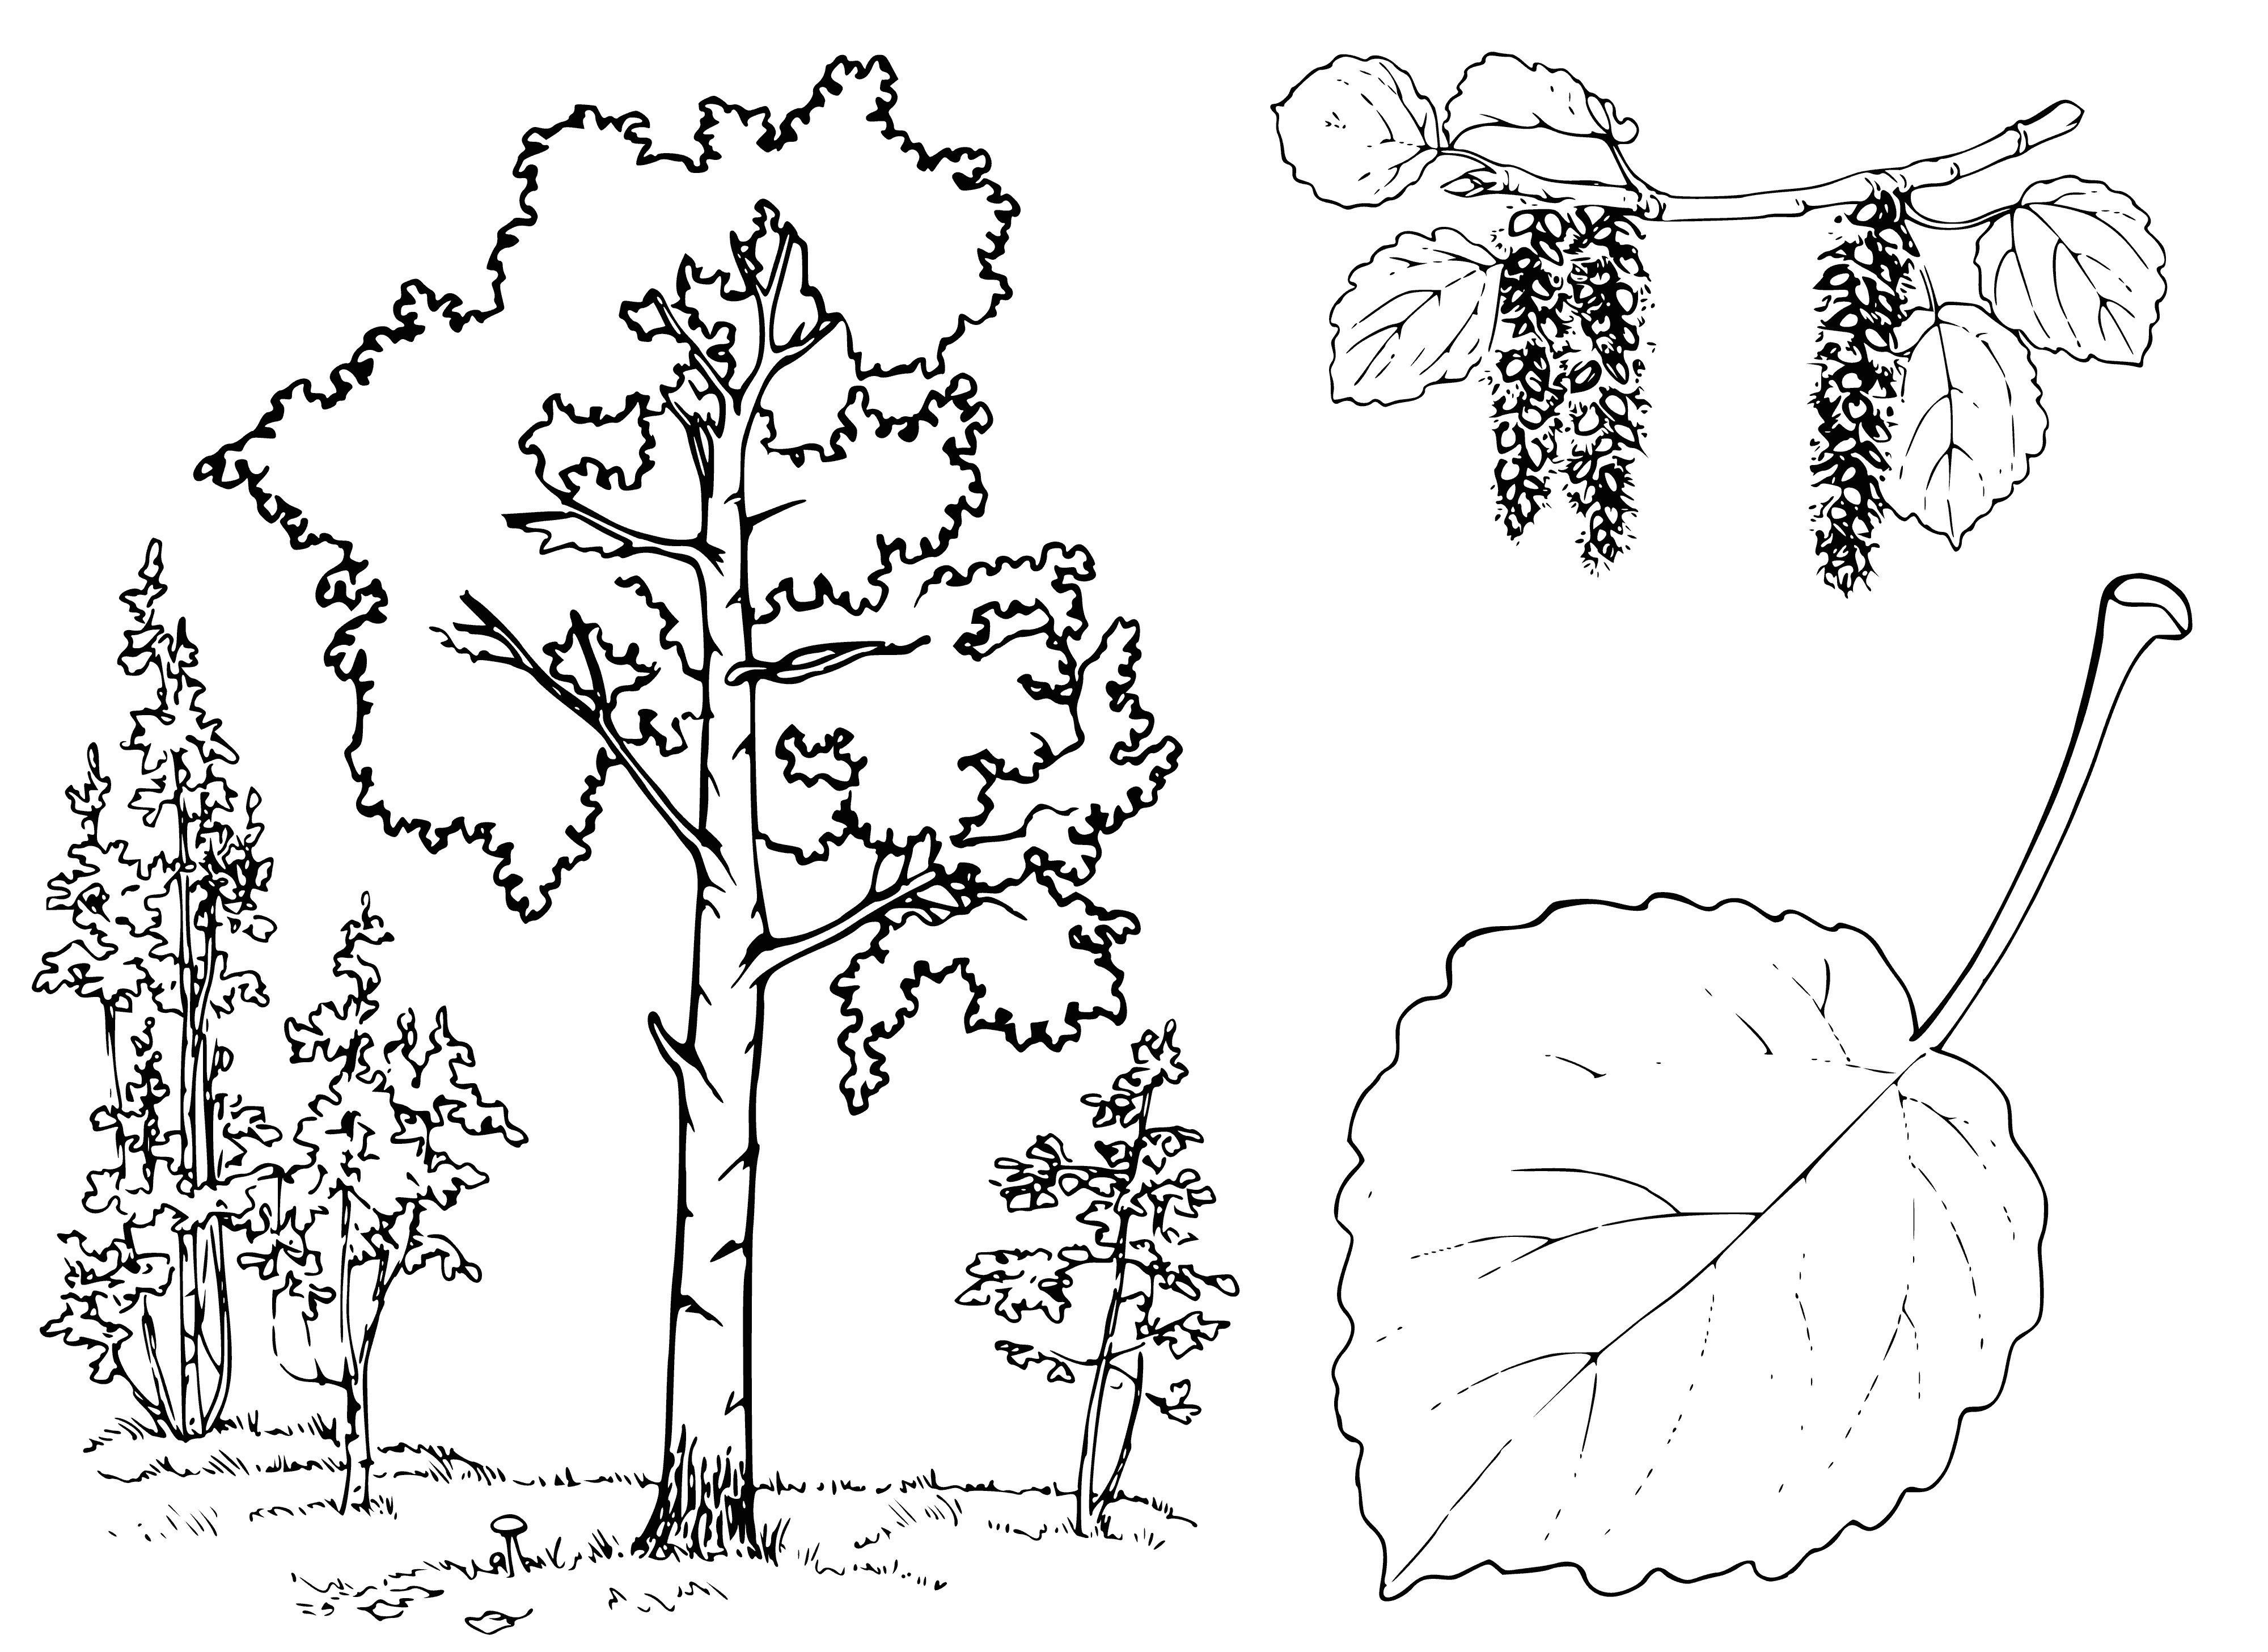 coloring page: Majestic deciduous tree with a slender trunk and smooth pale bark, heart-shaped leaves rustling in the wind; surrounded by smaller trees and shrubs w/ stream in the background.